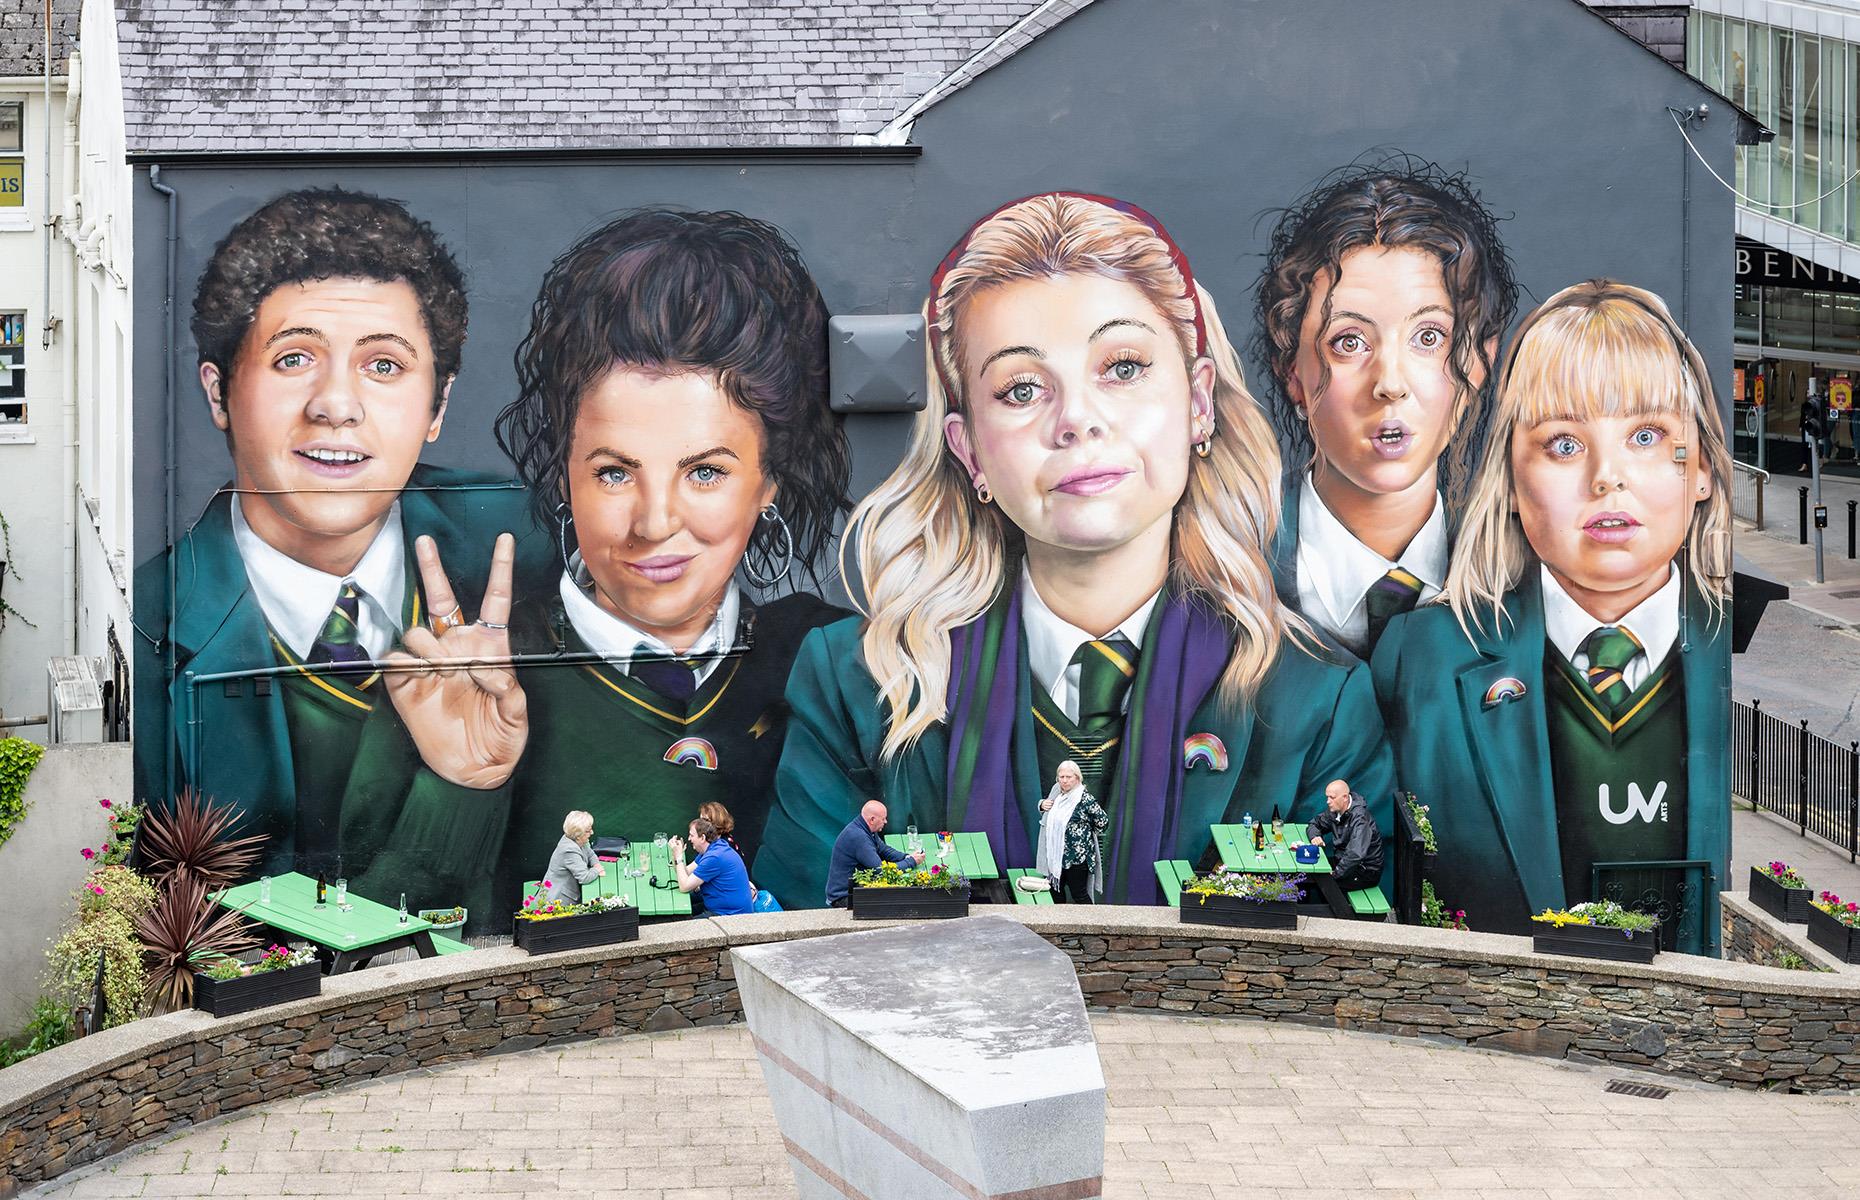 <p>In fact, there are plenty of opportunities for <em>Derry Girls </em>fans to immerse themselves in the world of these iconic characters while visiting the city. Perhaps the biggest attraction is the Derry Girls mural, painted by UV Arts in 2019 to honor the show’s impact on the city.</p>  <p>The mural is a fantastic photo opp for Derry Girls fans of all ages.</p>